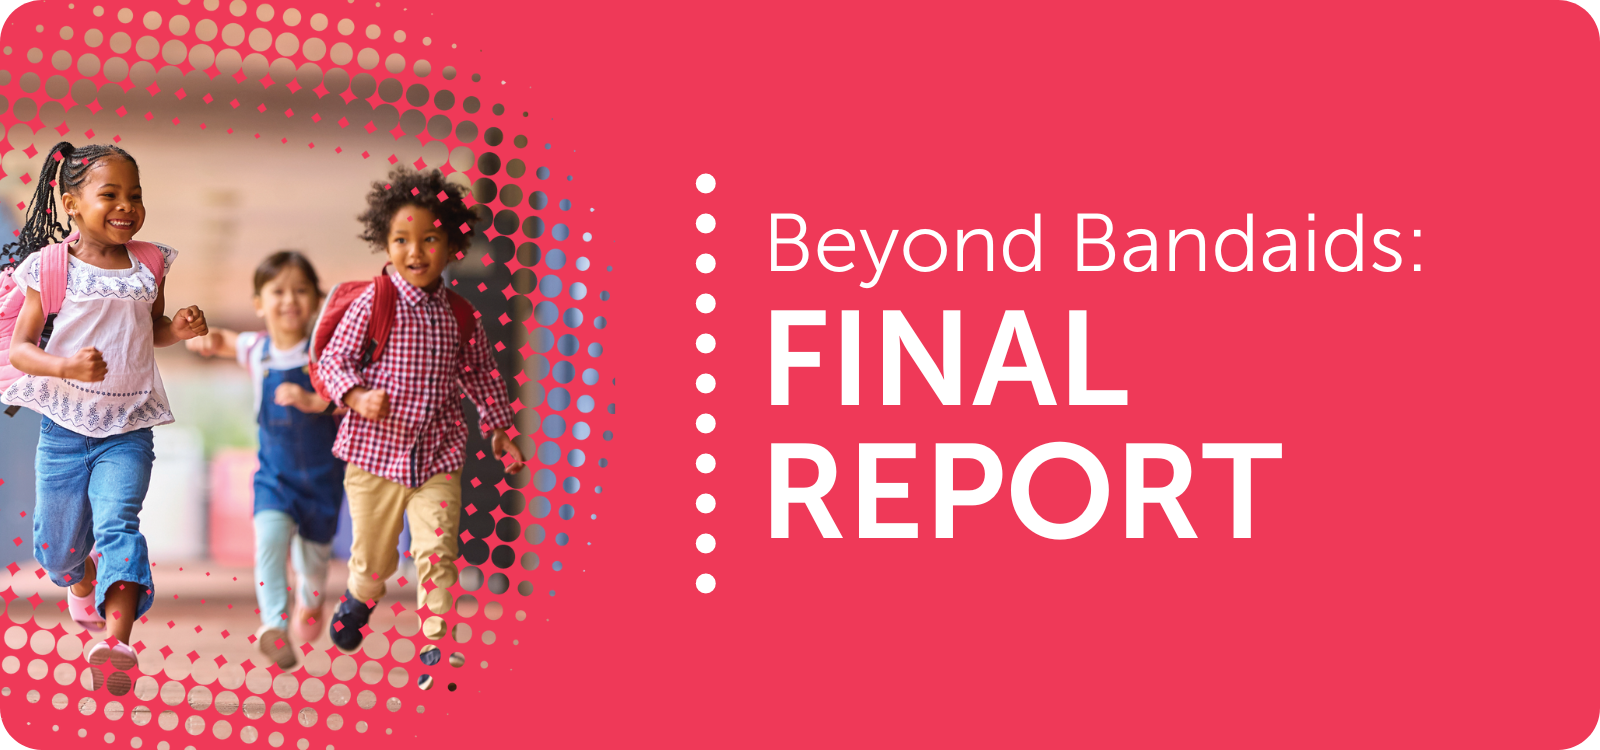 Image tile to download the Beyond Bandaids Final Report